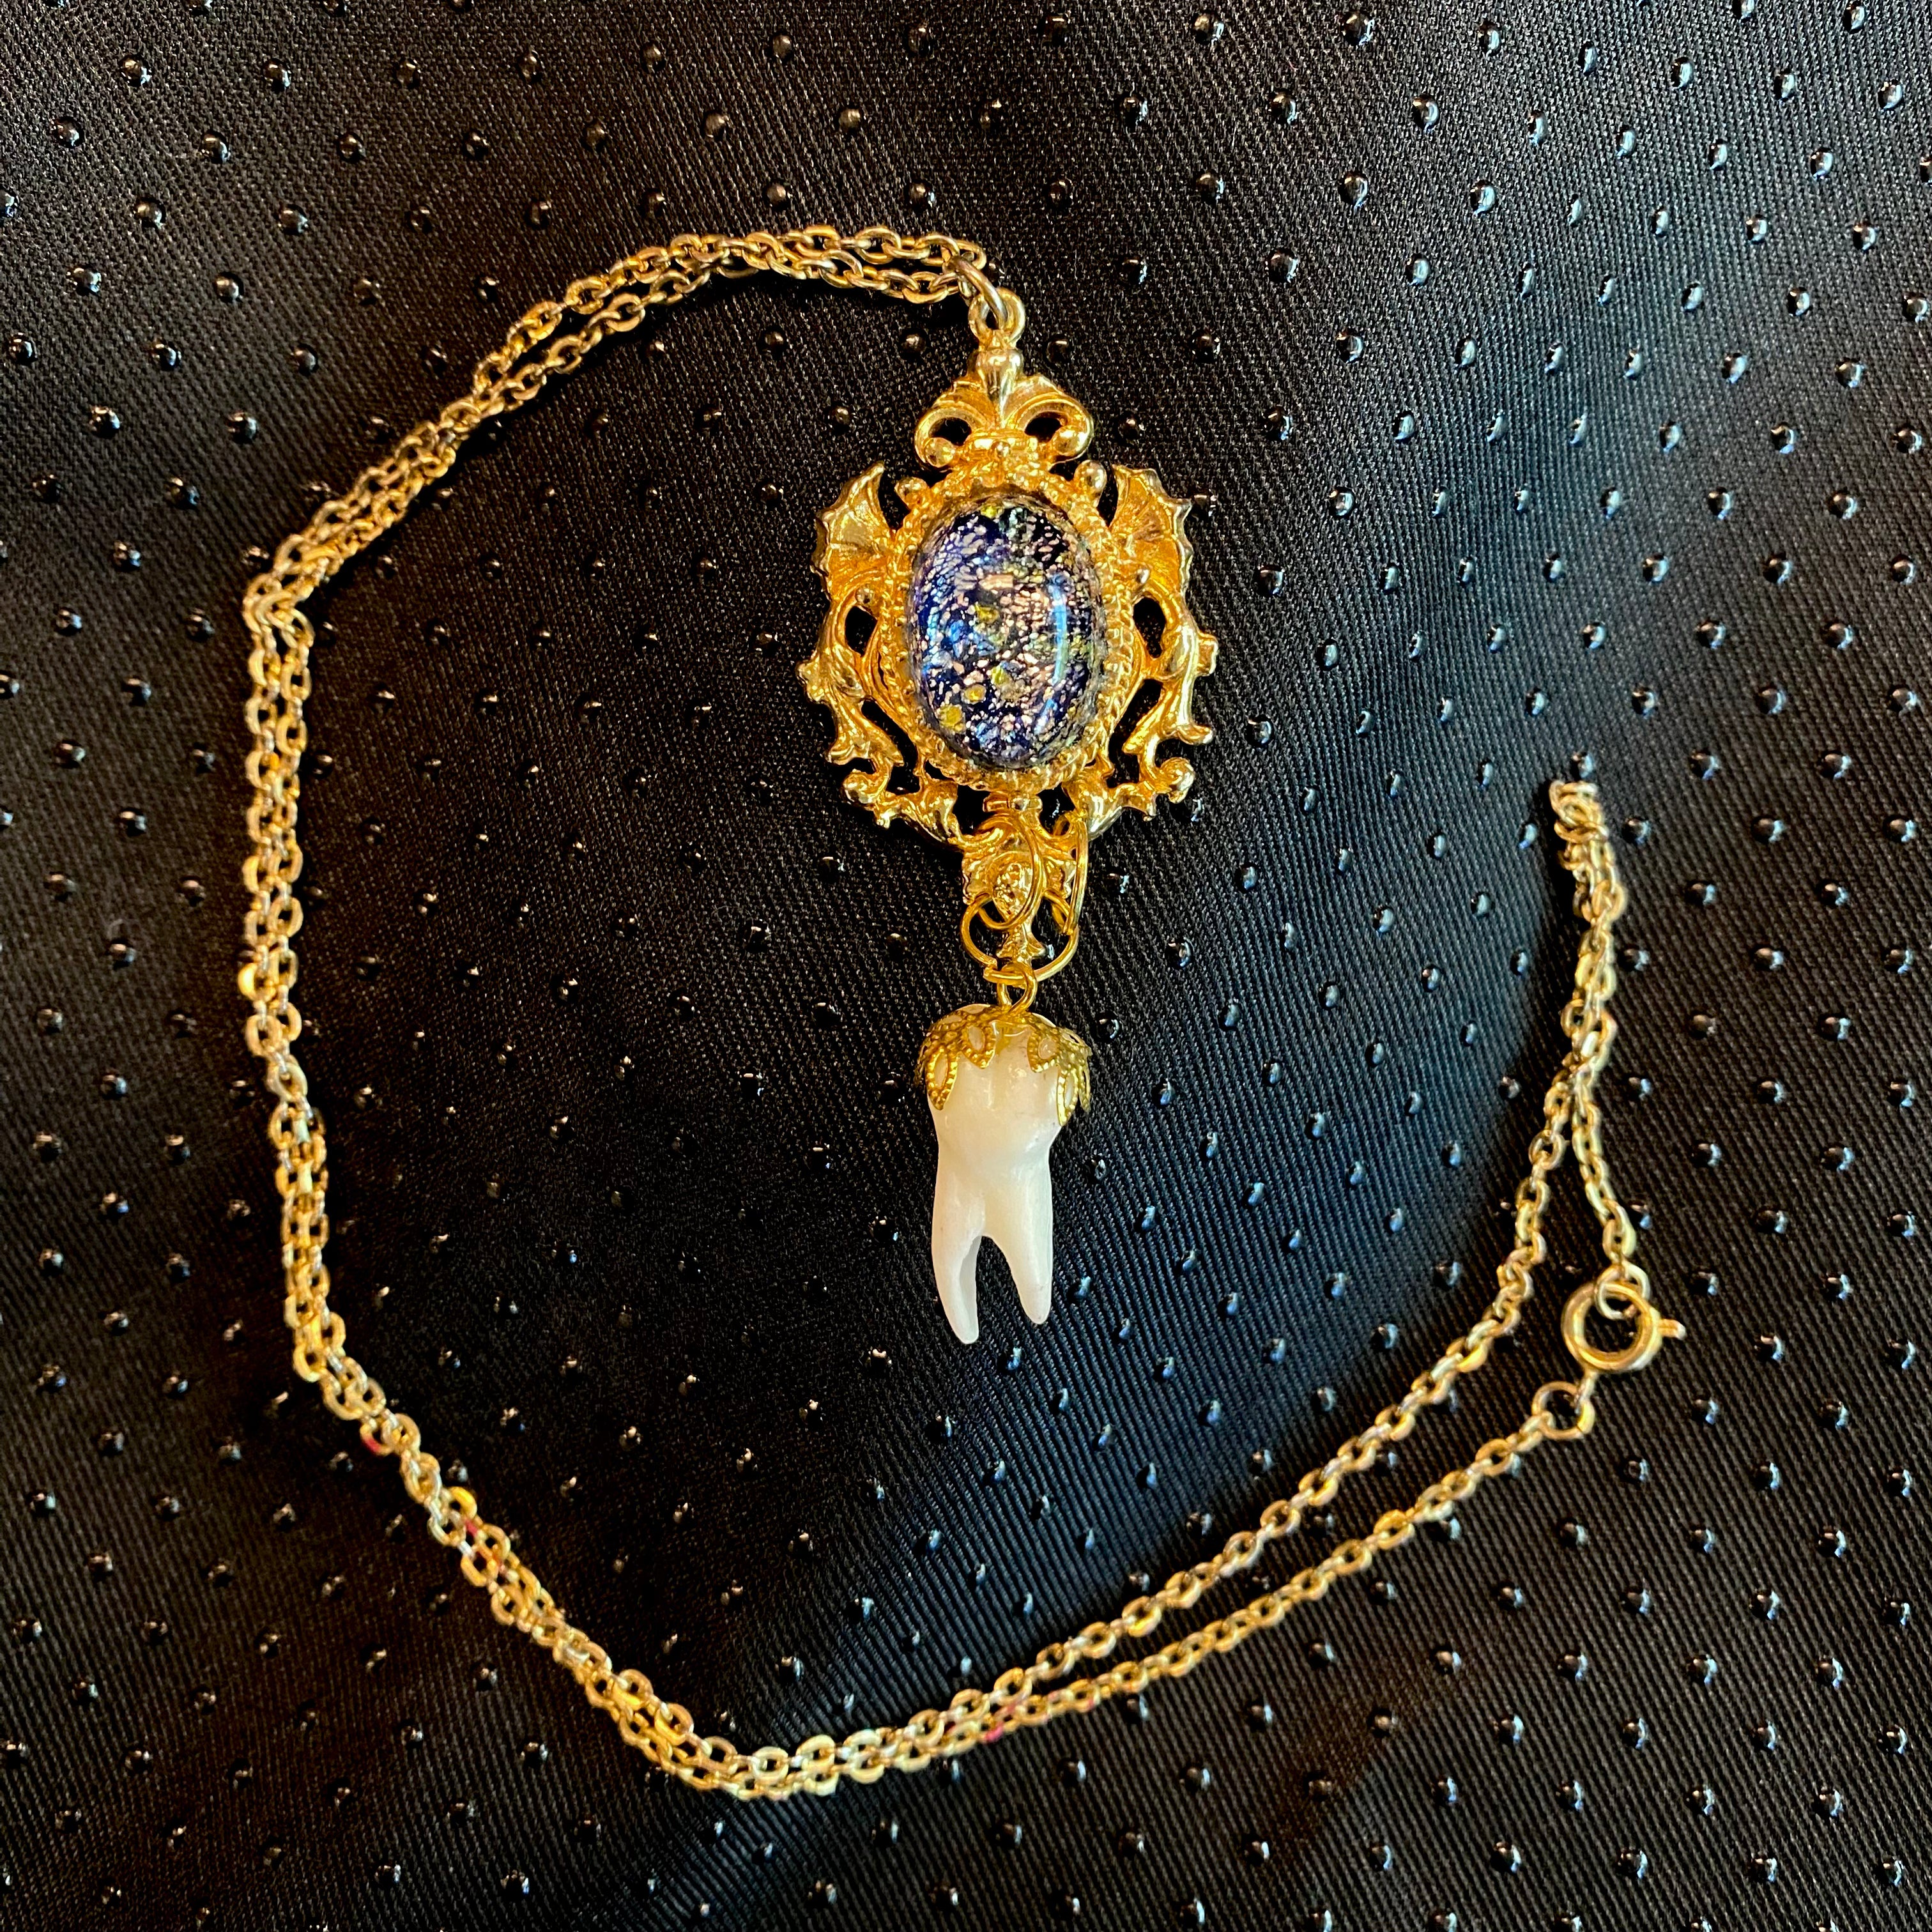 Vintage Necklace With Tooth Charm